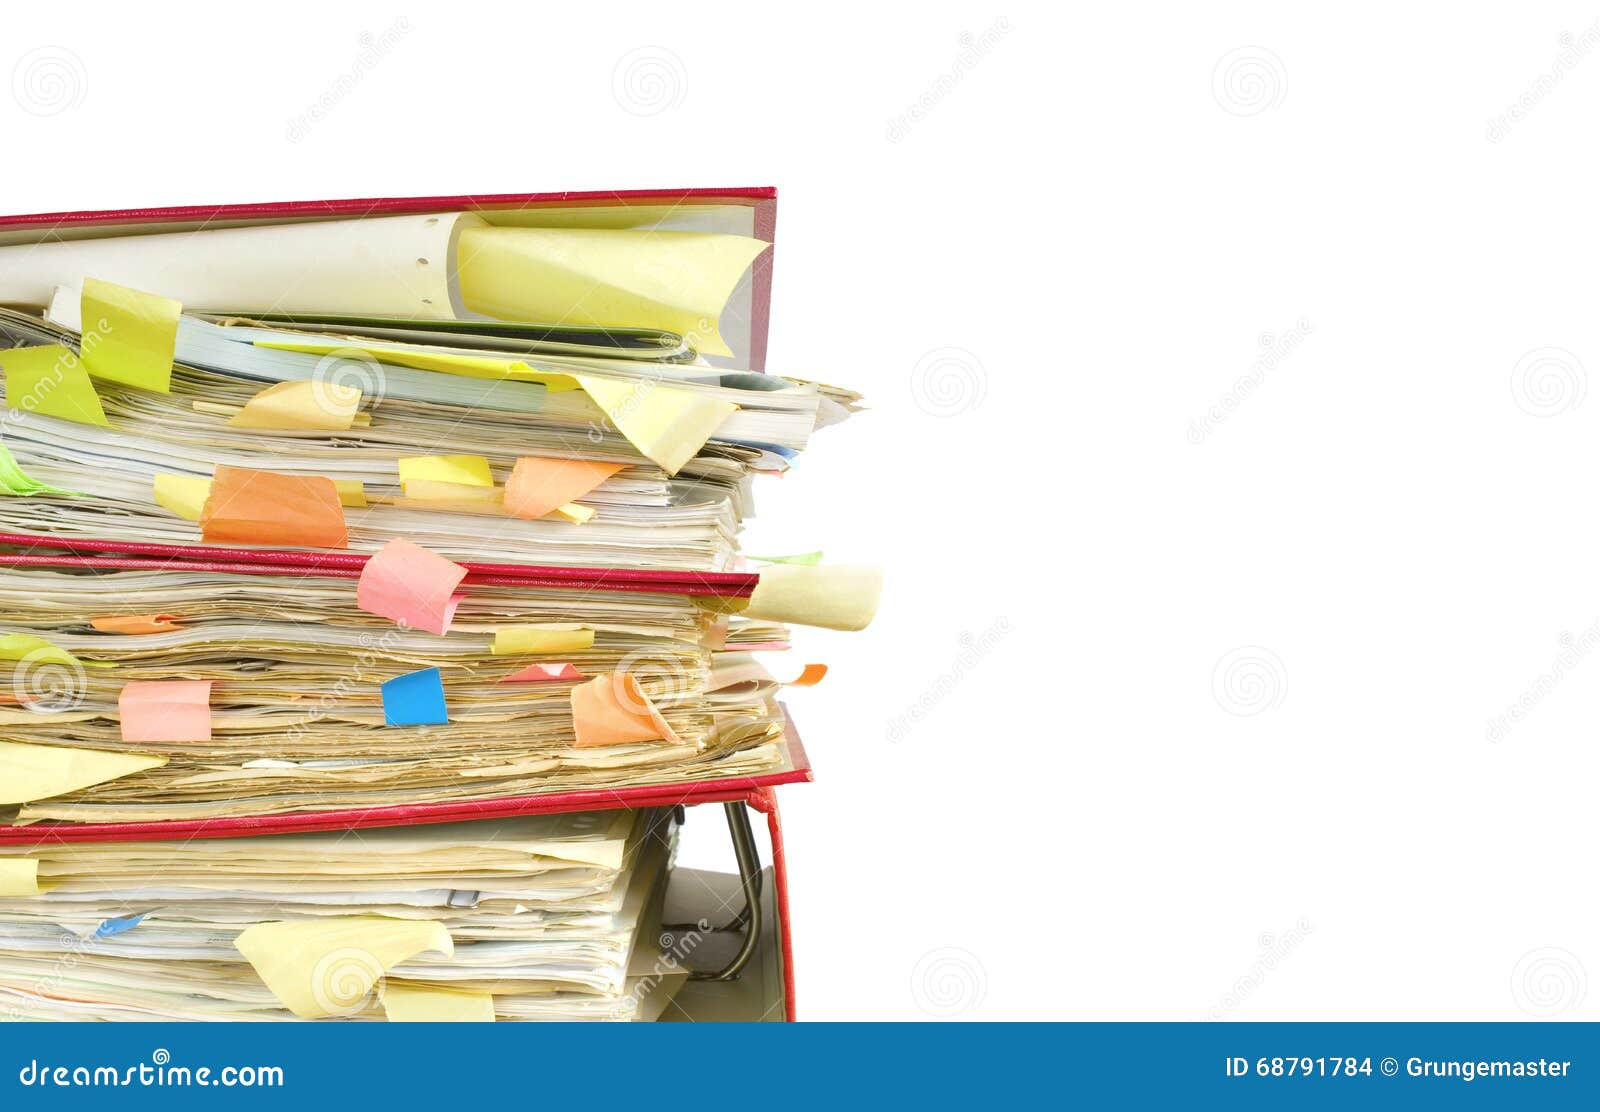 messy file folders and documents, 